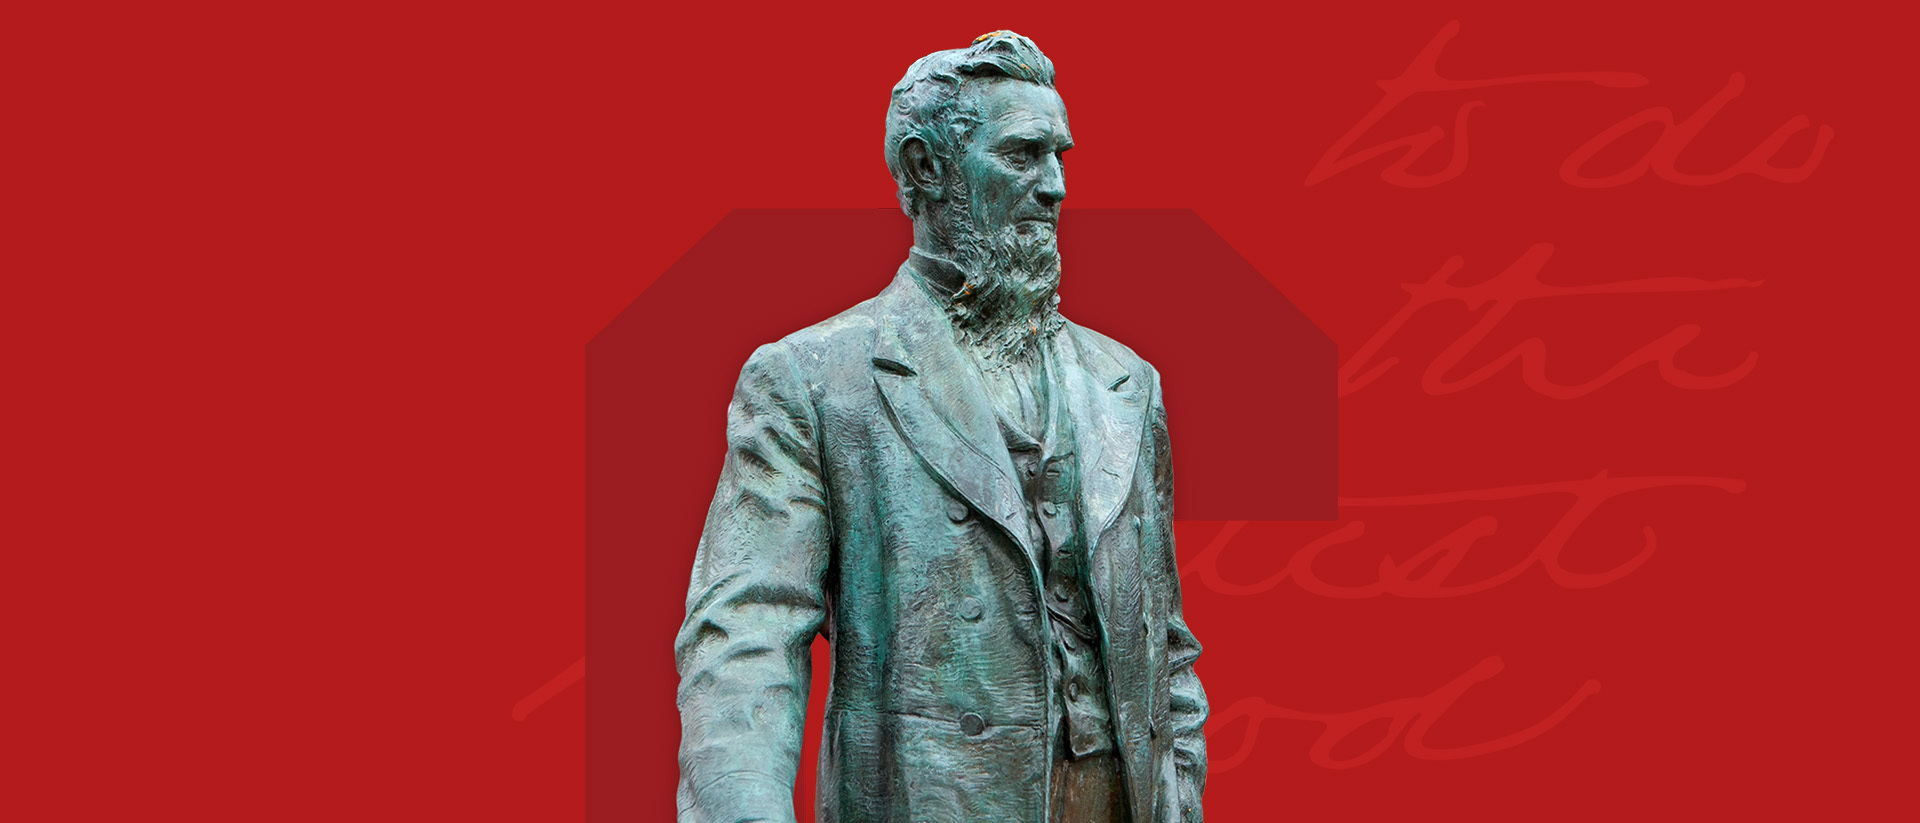 Ezra Cornell statue imposed over a red background in front of a large floating letter C (for Cornell). Text in the background says 'to do the greatest good' and is in Ezra Cornell's actual handwriting.